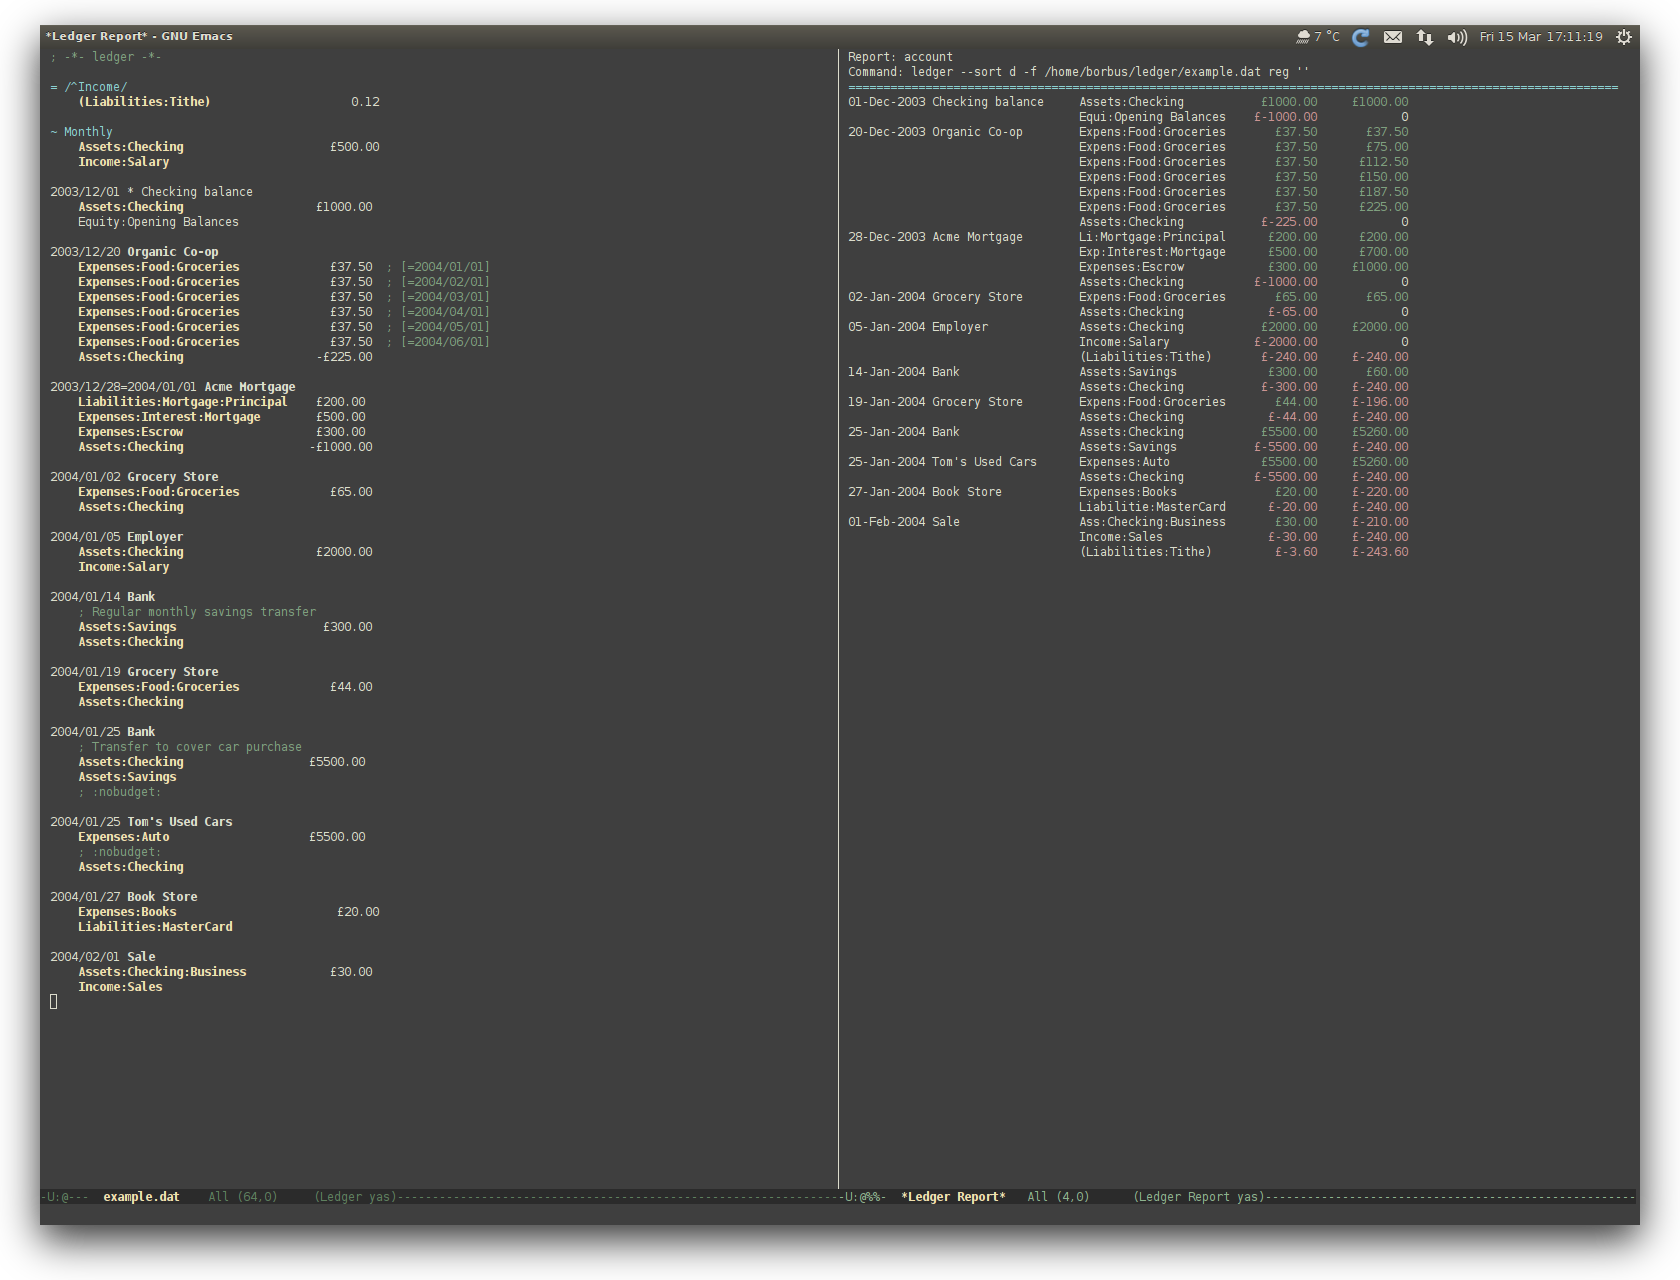 /TakeV/spacemacs/media/commit/39c69def5cc969a01b83ffb46949bd163be05188/layers/finance/img/ledger.png